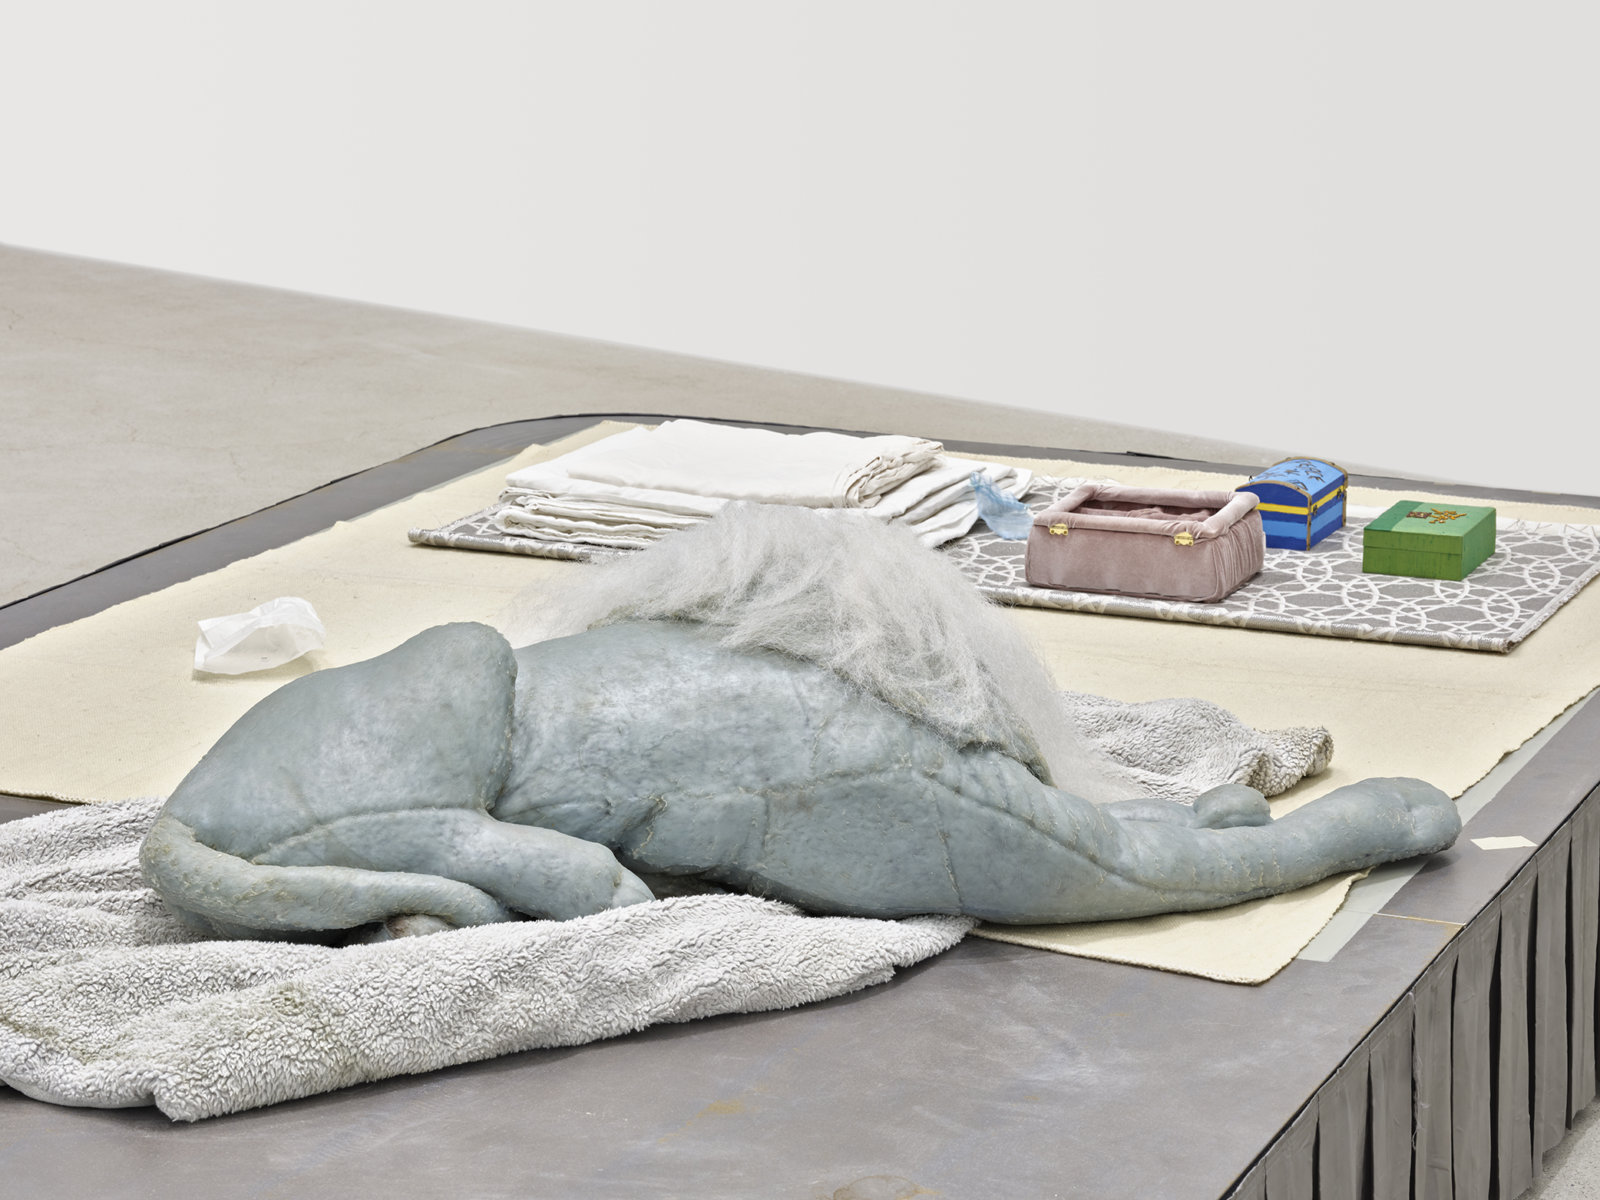 Liz Magor, Coiffed (detail), 2020, painted plywood, fabric skirting, silicone rubber, artificial hair, acrylic throw, woollen blankets, silver fabric, linen, jewellery boxes, costume jewellery, packaging materials, 27 x 132 x 96 in. (69 x 335 x 244 cm)